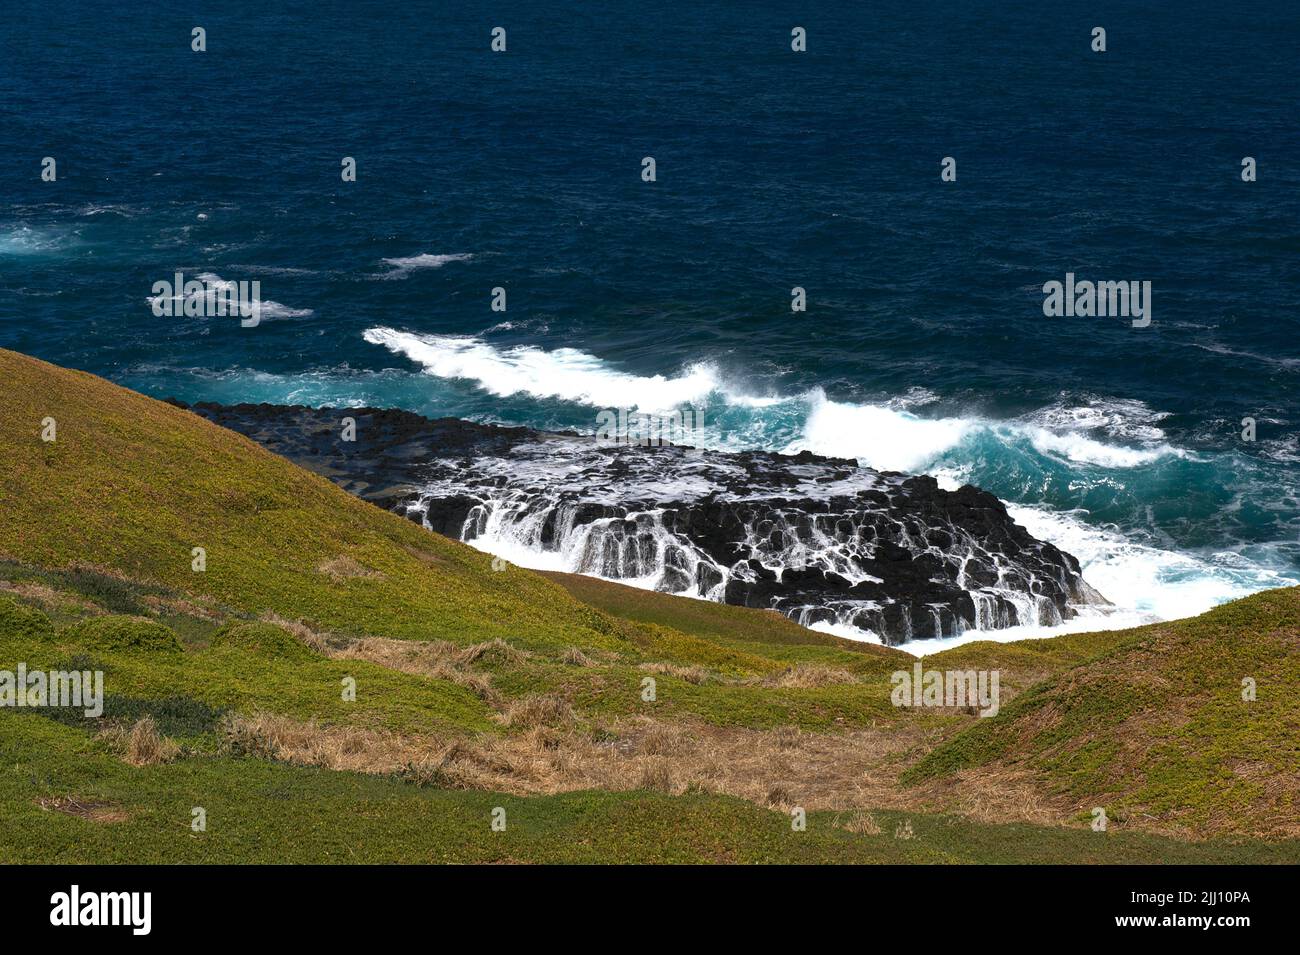 A view of the aftermath of breaking waves on the rocks near The Nobbies on Phillip Island, Victoria, Australia. Bass Strait is famous for rough seas. Stock Photo